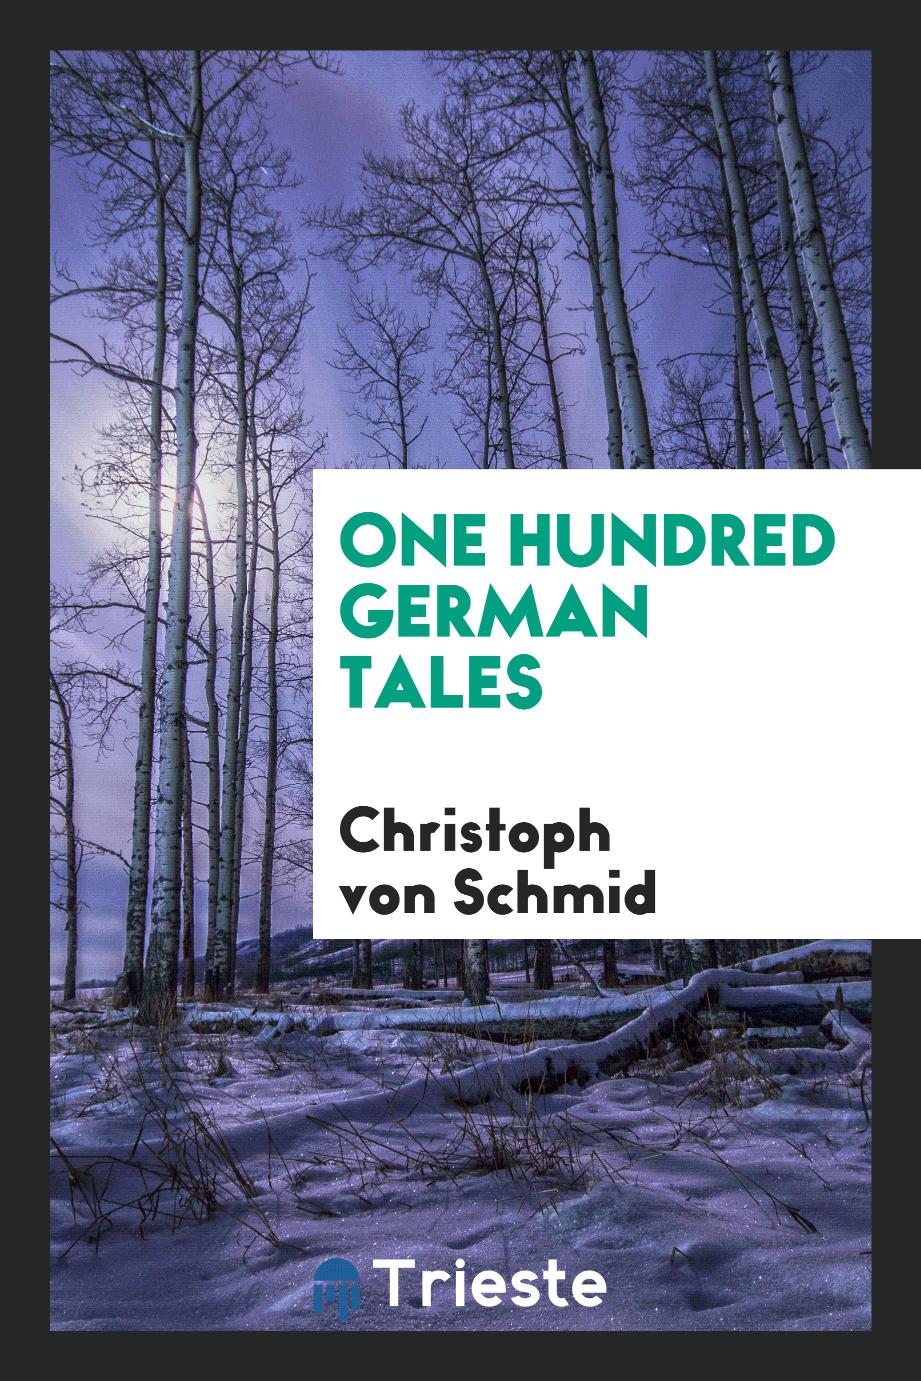 One hundred German tales